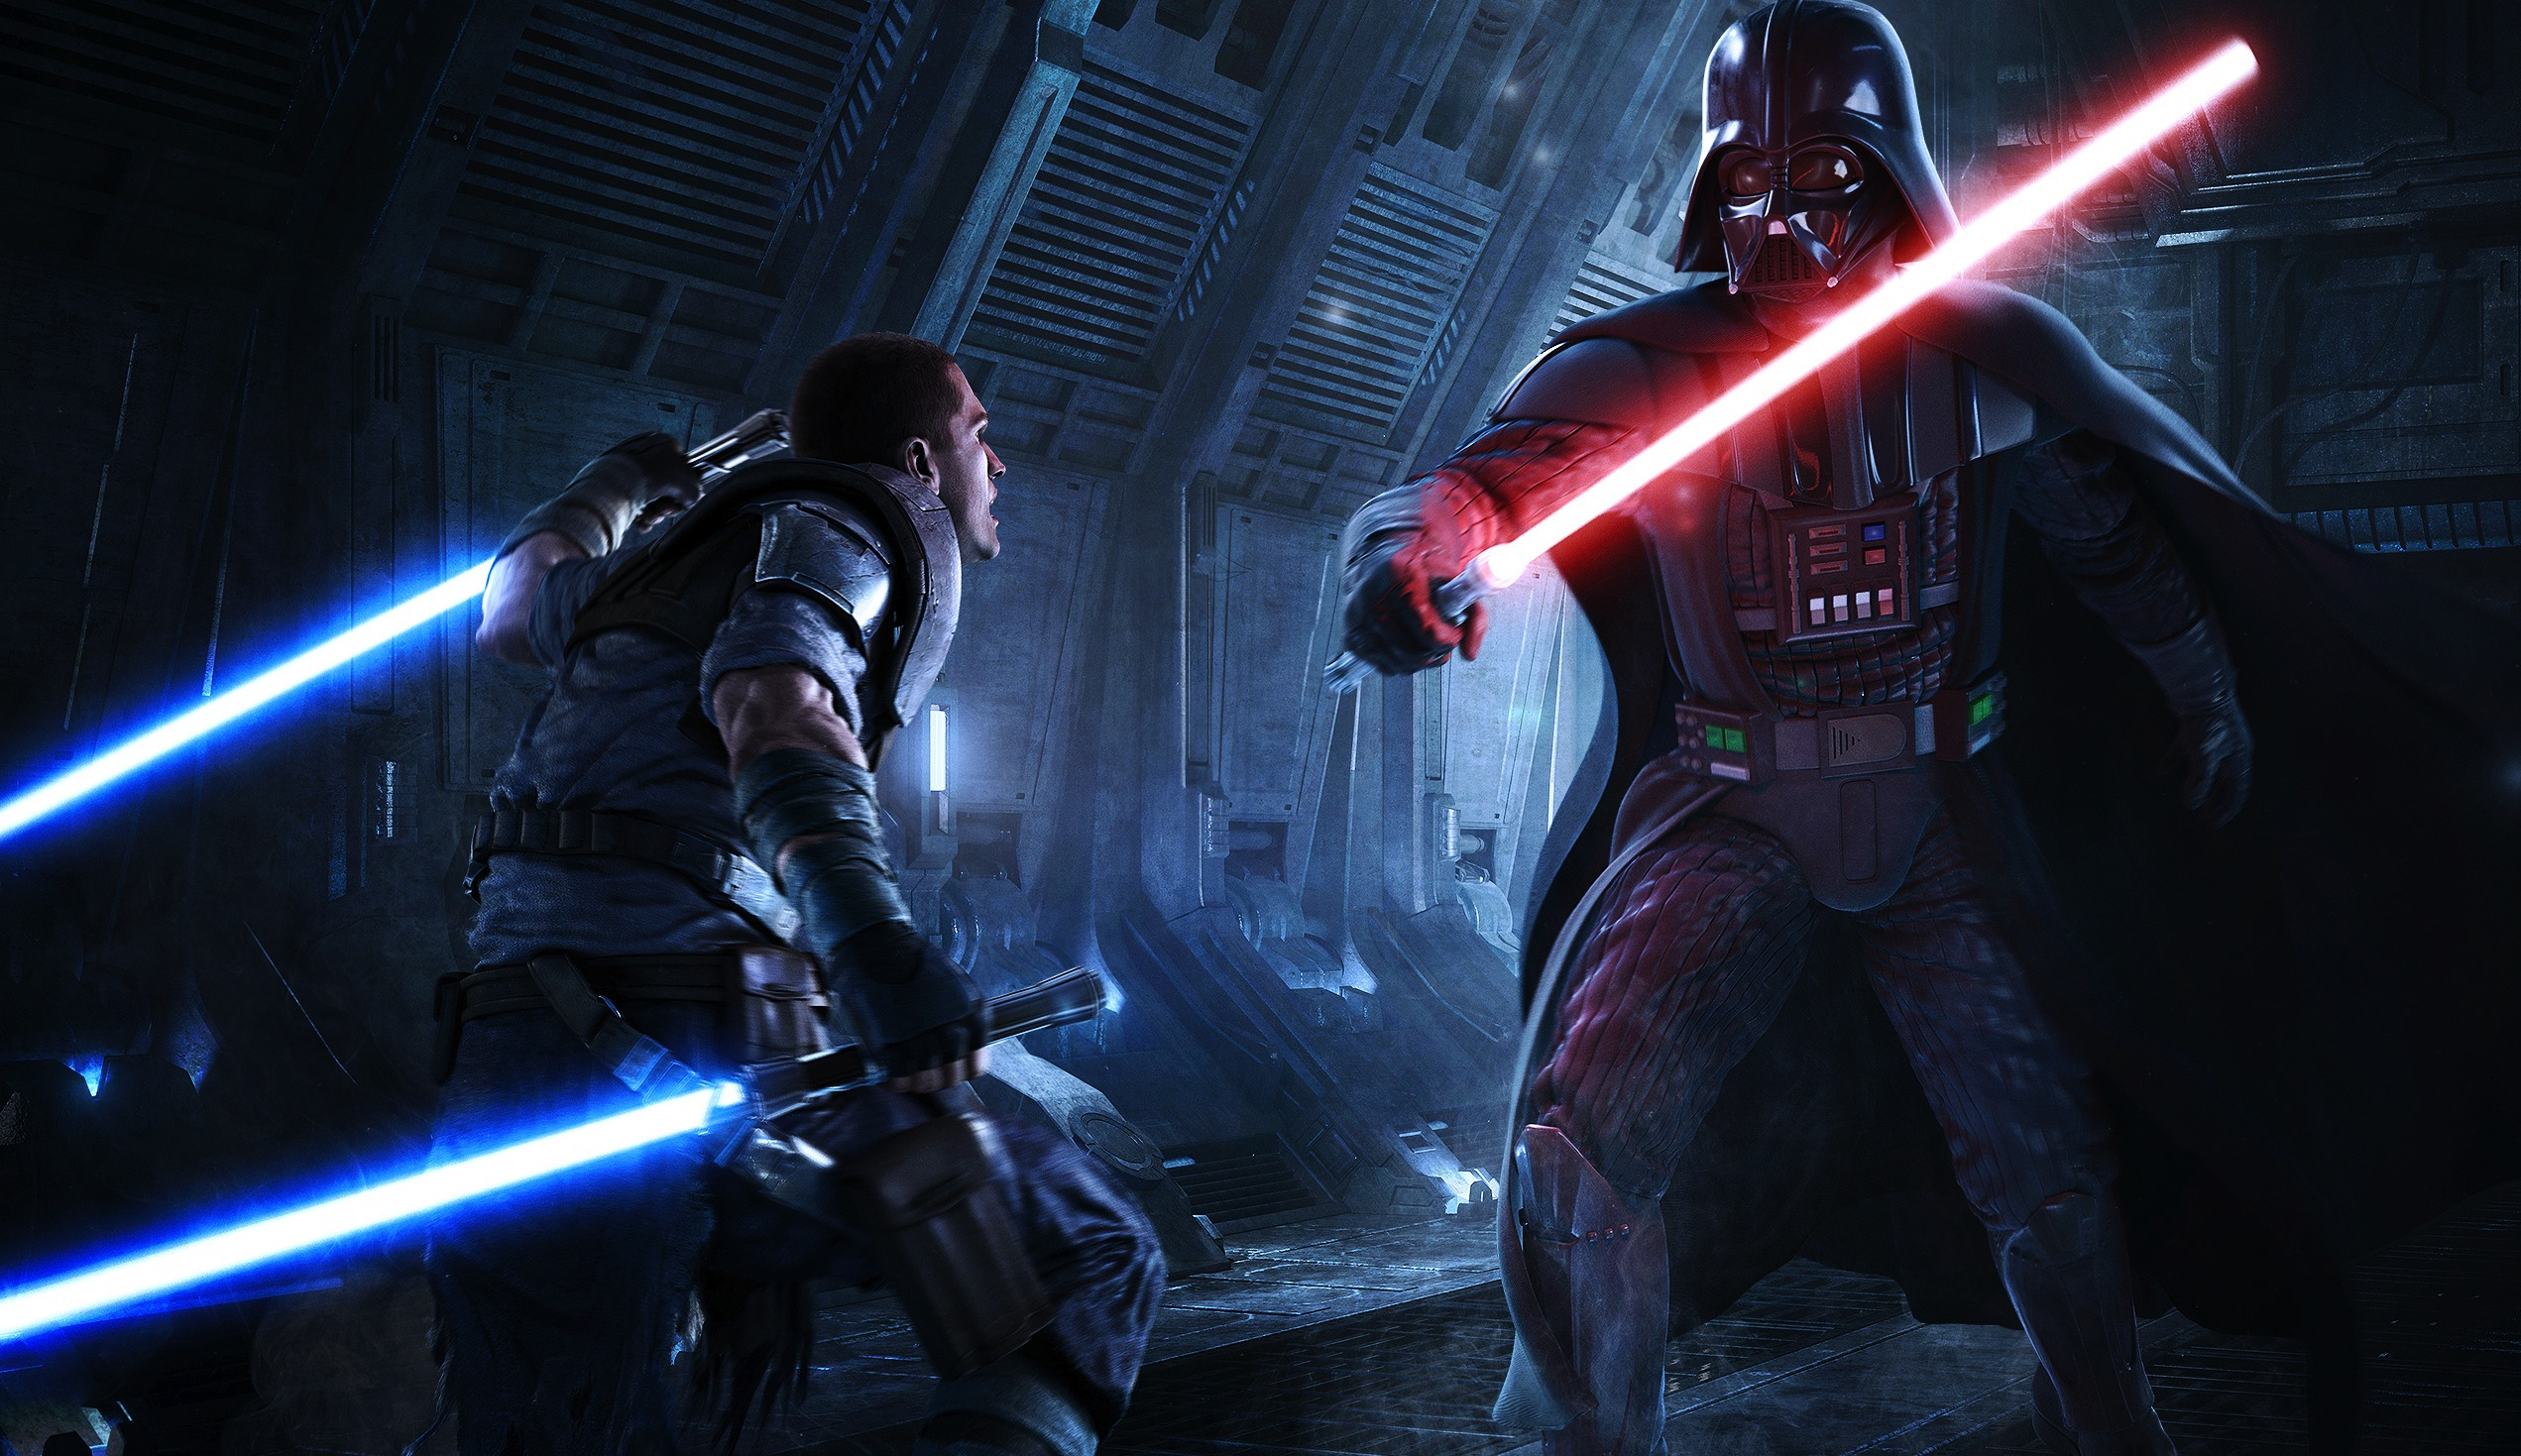 2543x1469 10+ Starkiller (Star Wars) HD Wallpapers and Backgrounds